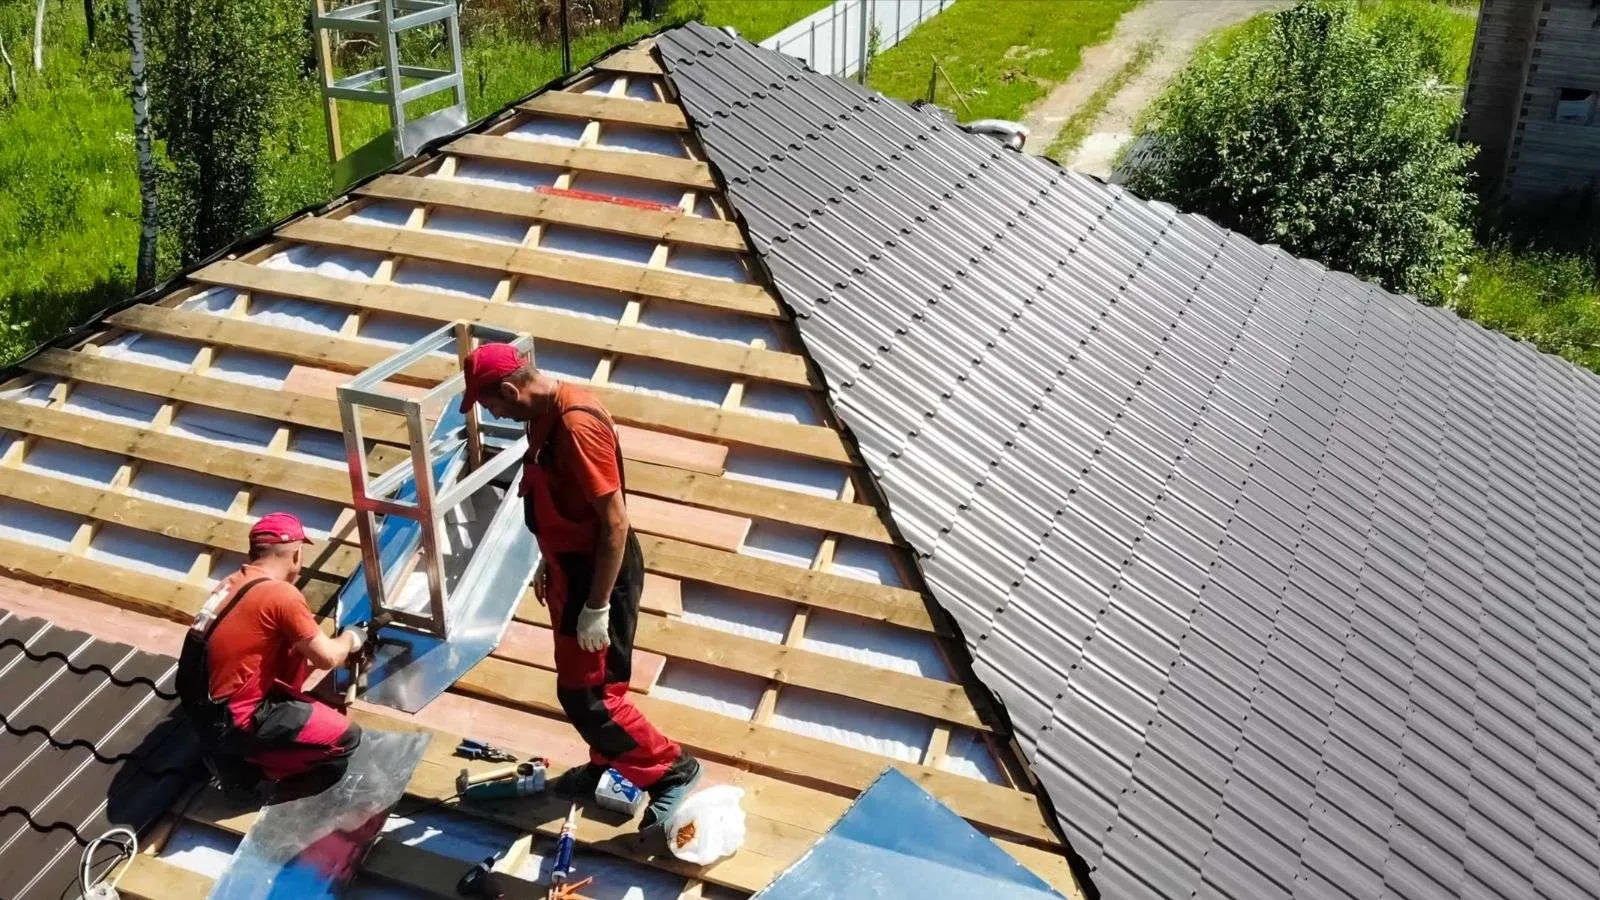 Materials in roof - bighomeprojects.com